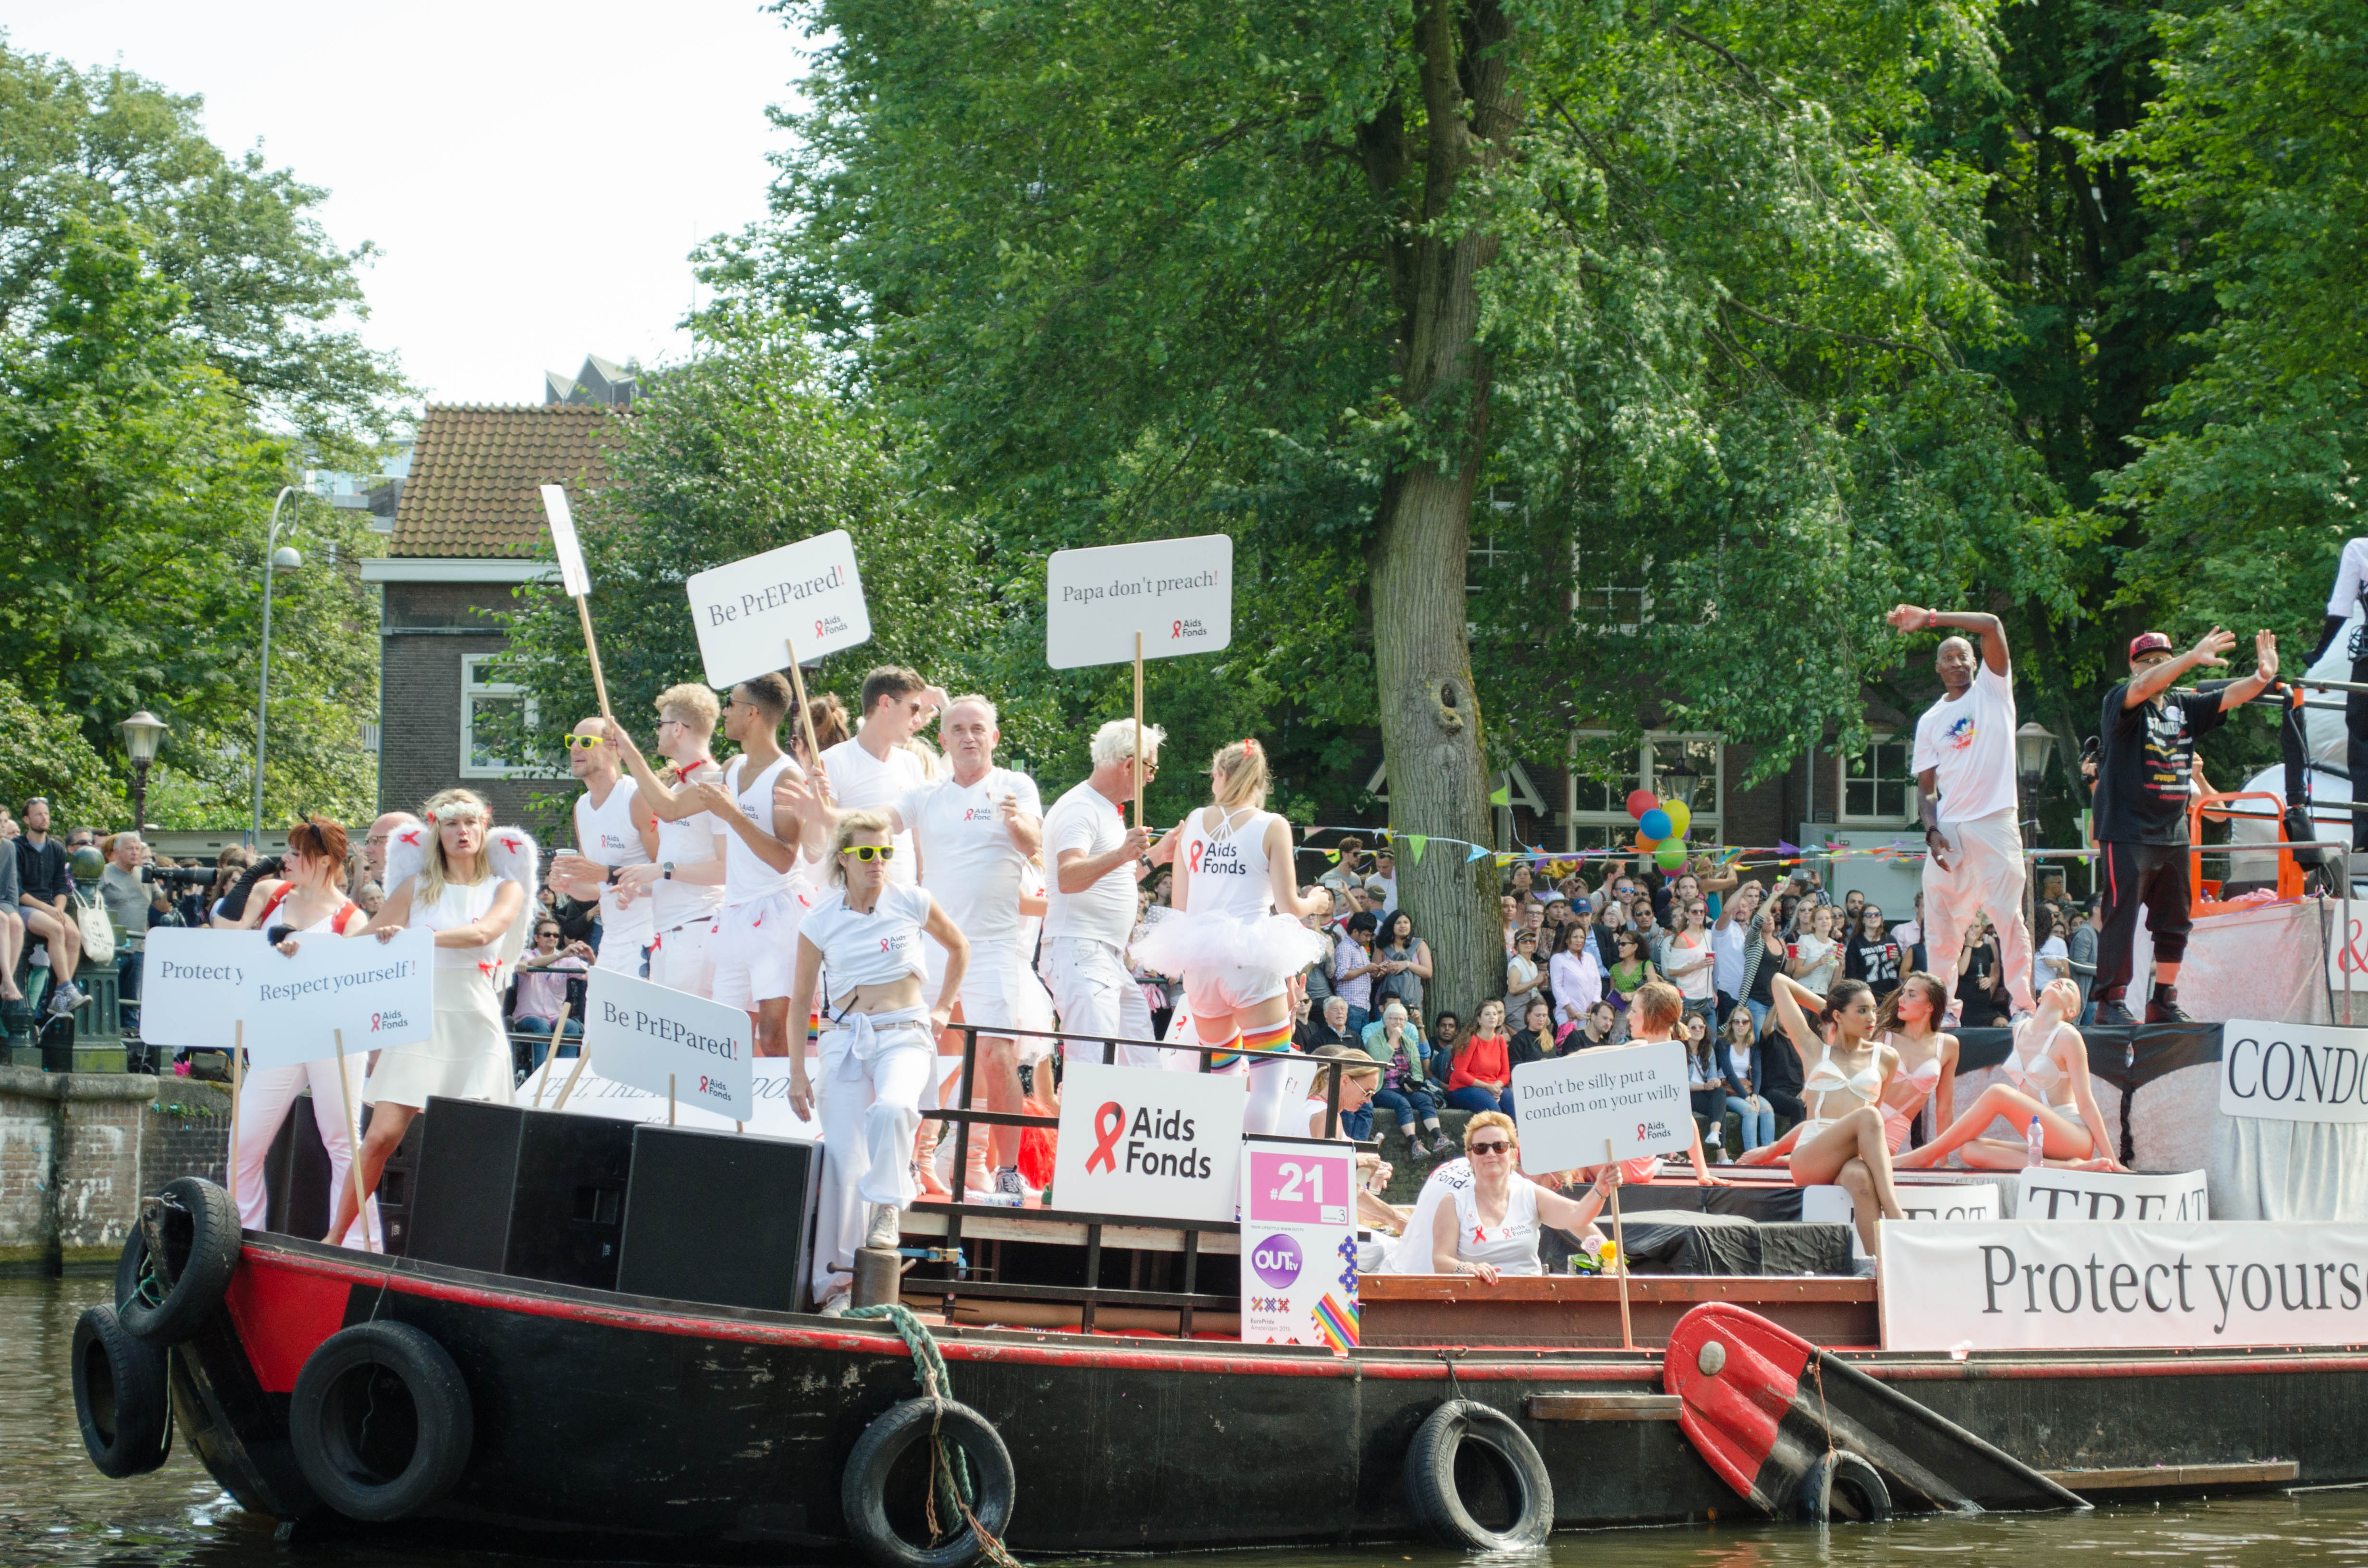 The GGD boat during the 2016 Pride Parade in Amsterdam, advocating for PrEP and the AIDS Fonds